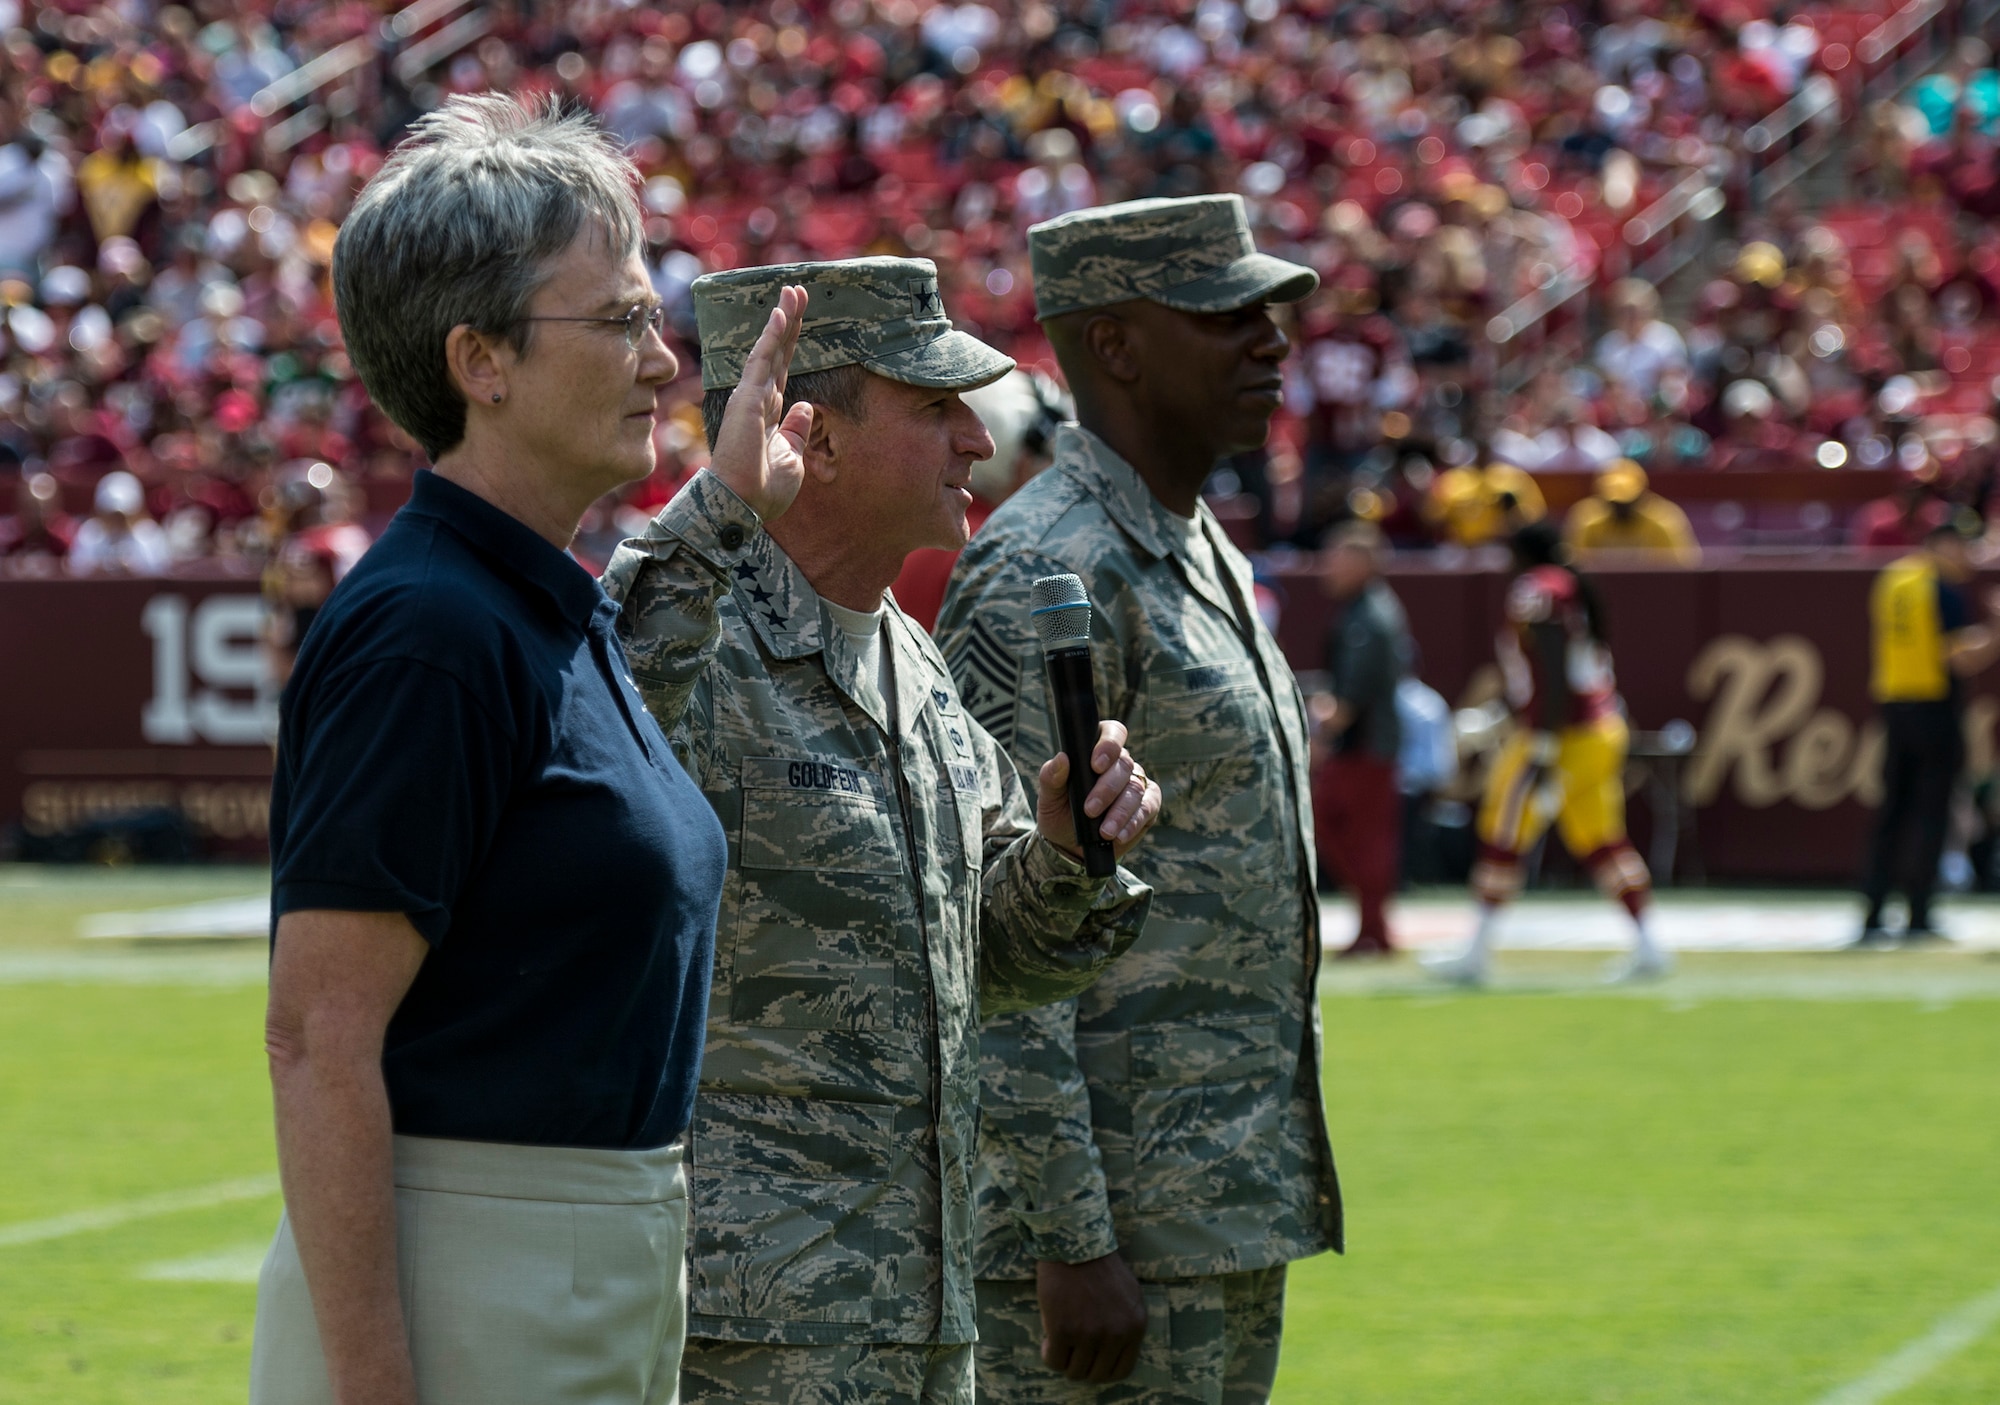 Secretary of the Air Force Heather Wilson, Chief of Staff of the Air Force Gen. David L. Goldfein and Chief Master Sgt. of the Air Force Kaleth O. Wright swear in delayed entry members during the Washington Redskins versus Philadelphia Eagles game at the FedExField in Hyattsville, Md., Sept. 10, 2017. The game was dedicated to the men and women of the U.S. Air Force in celebration of the service's 70th birthday. (U.S. Air Force photo by Senior Airman Rusty Frank/Released)